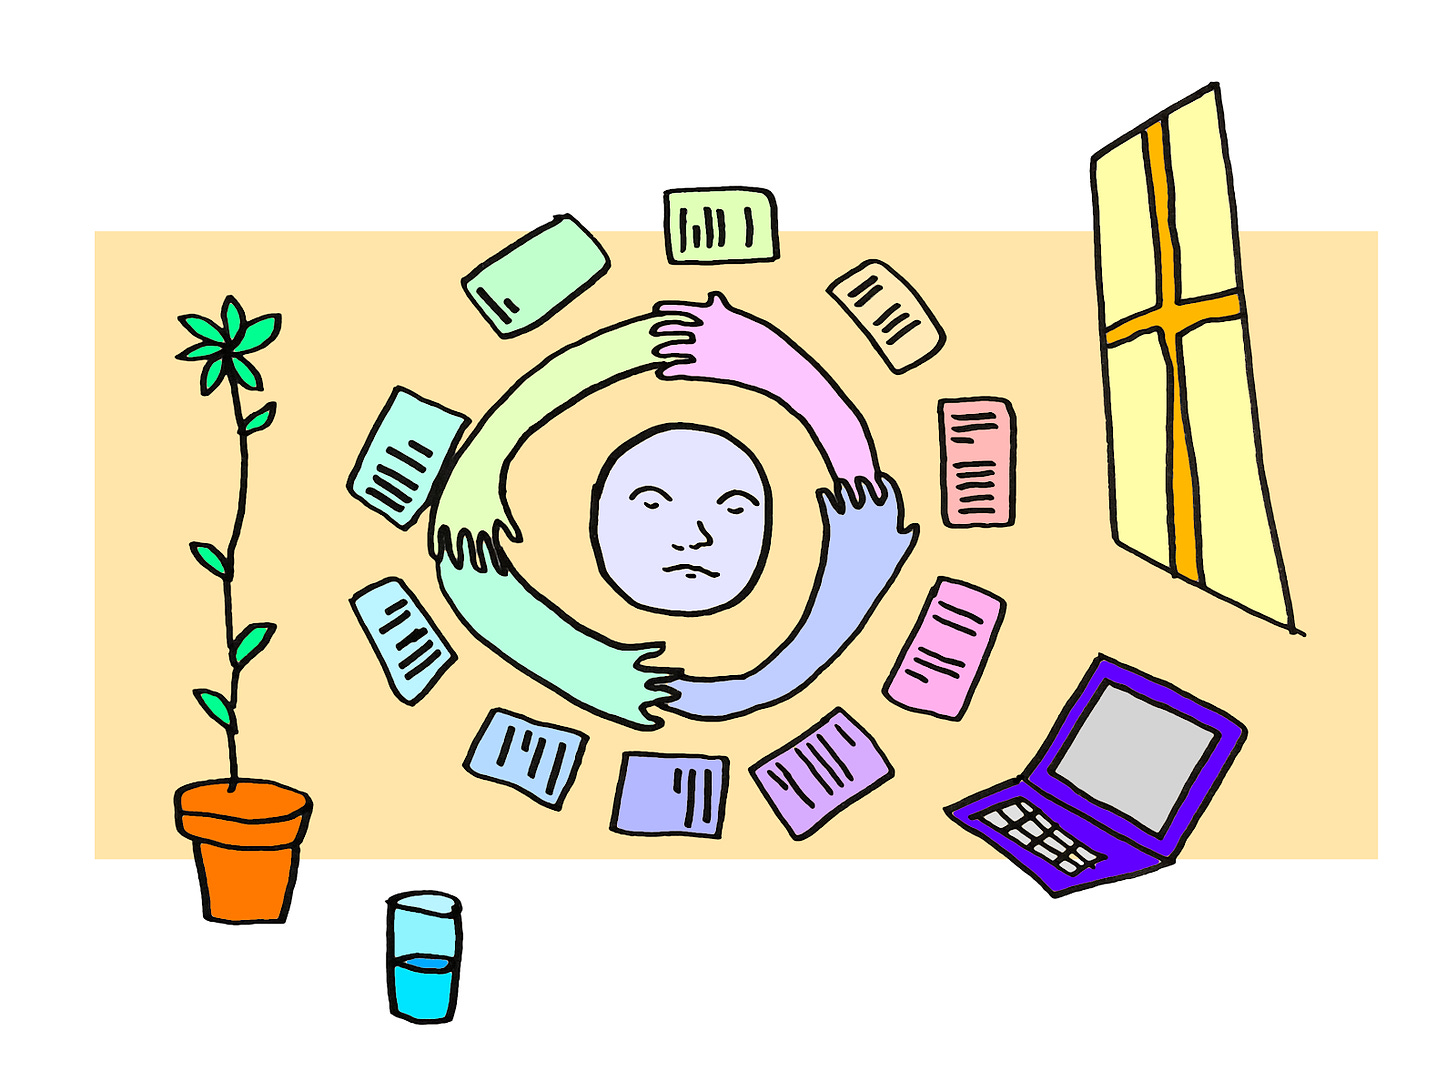 A plant pot, half filled glass of water, a laptop, a window, and a calm emoji around which a circle is made of four hands